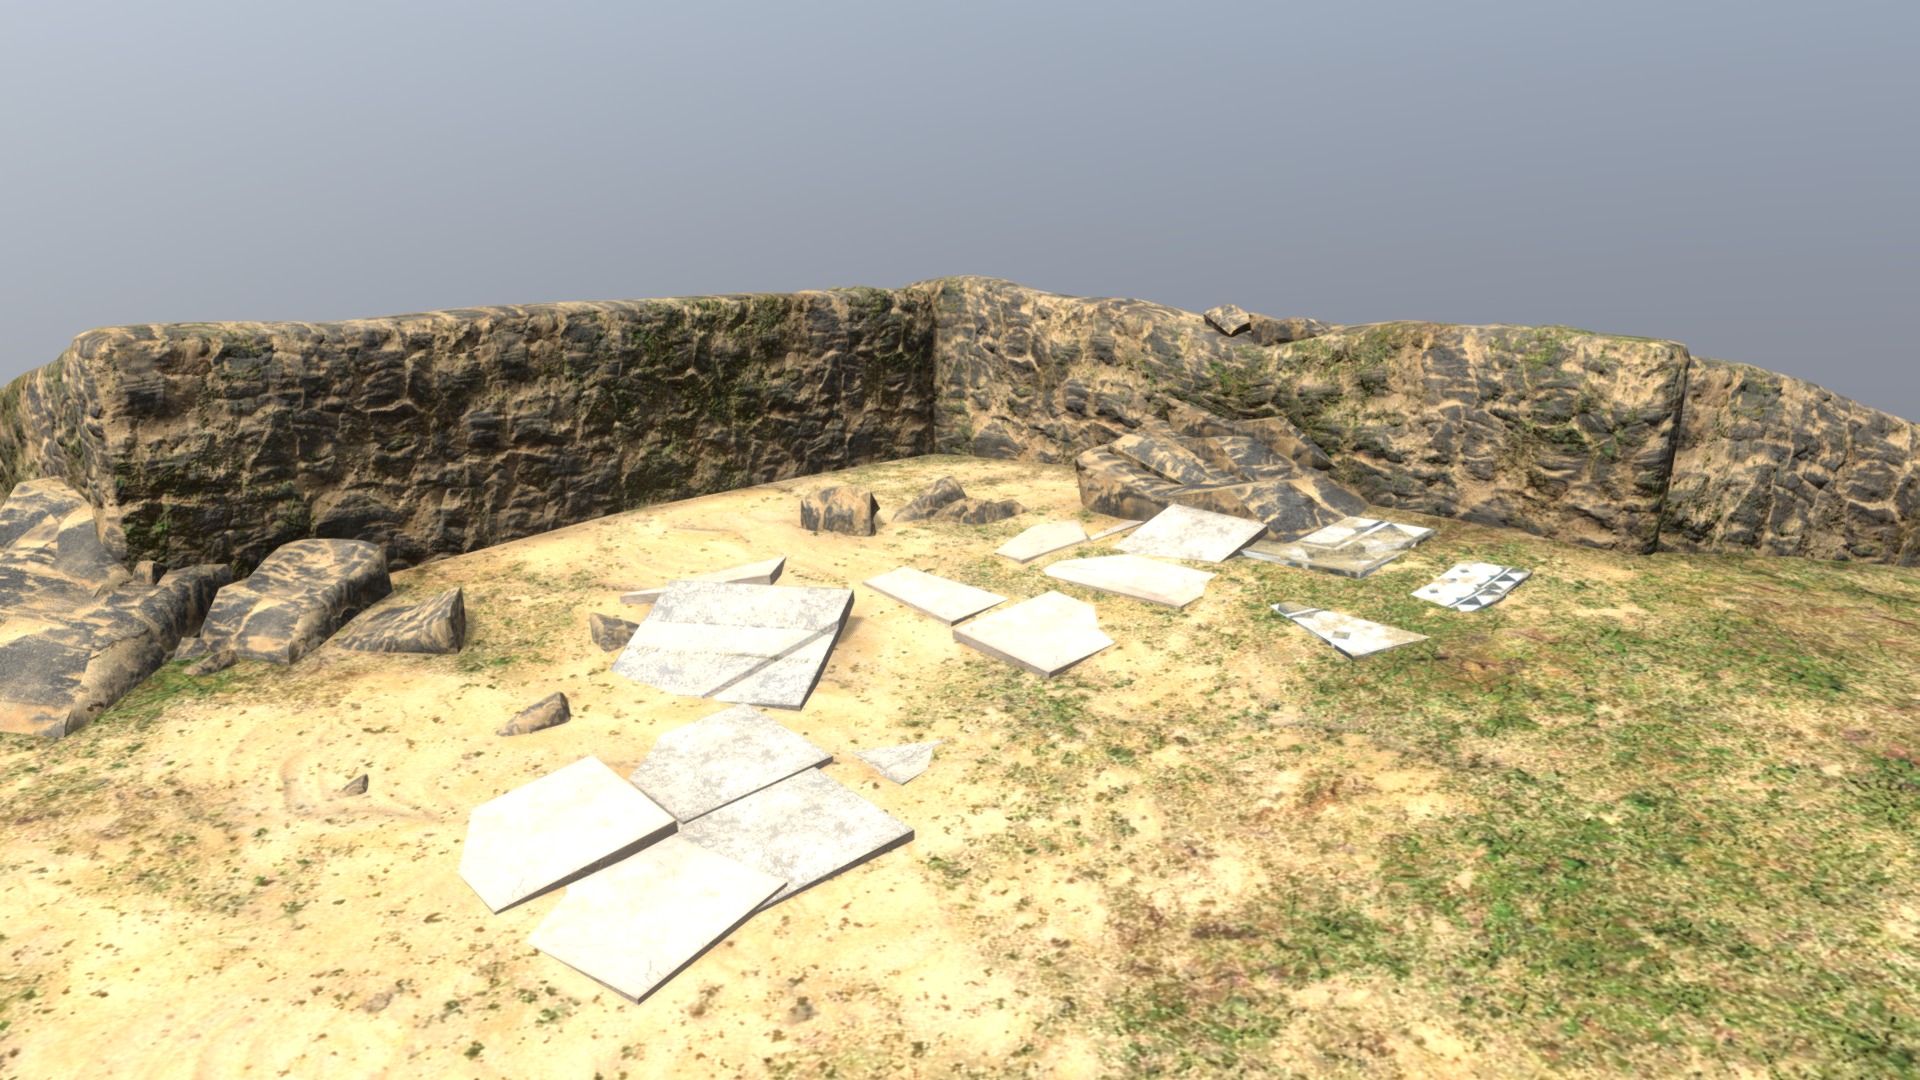 3D model Forgotten Ruins - This is a 3D model of the Forgotten Ruins. The 3D model is about a group of rectangular objects on a grassy hill.